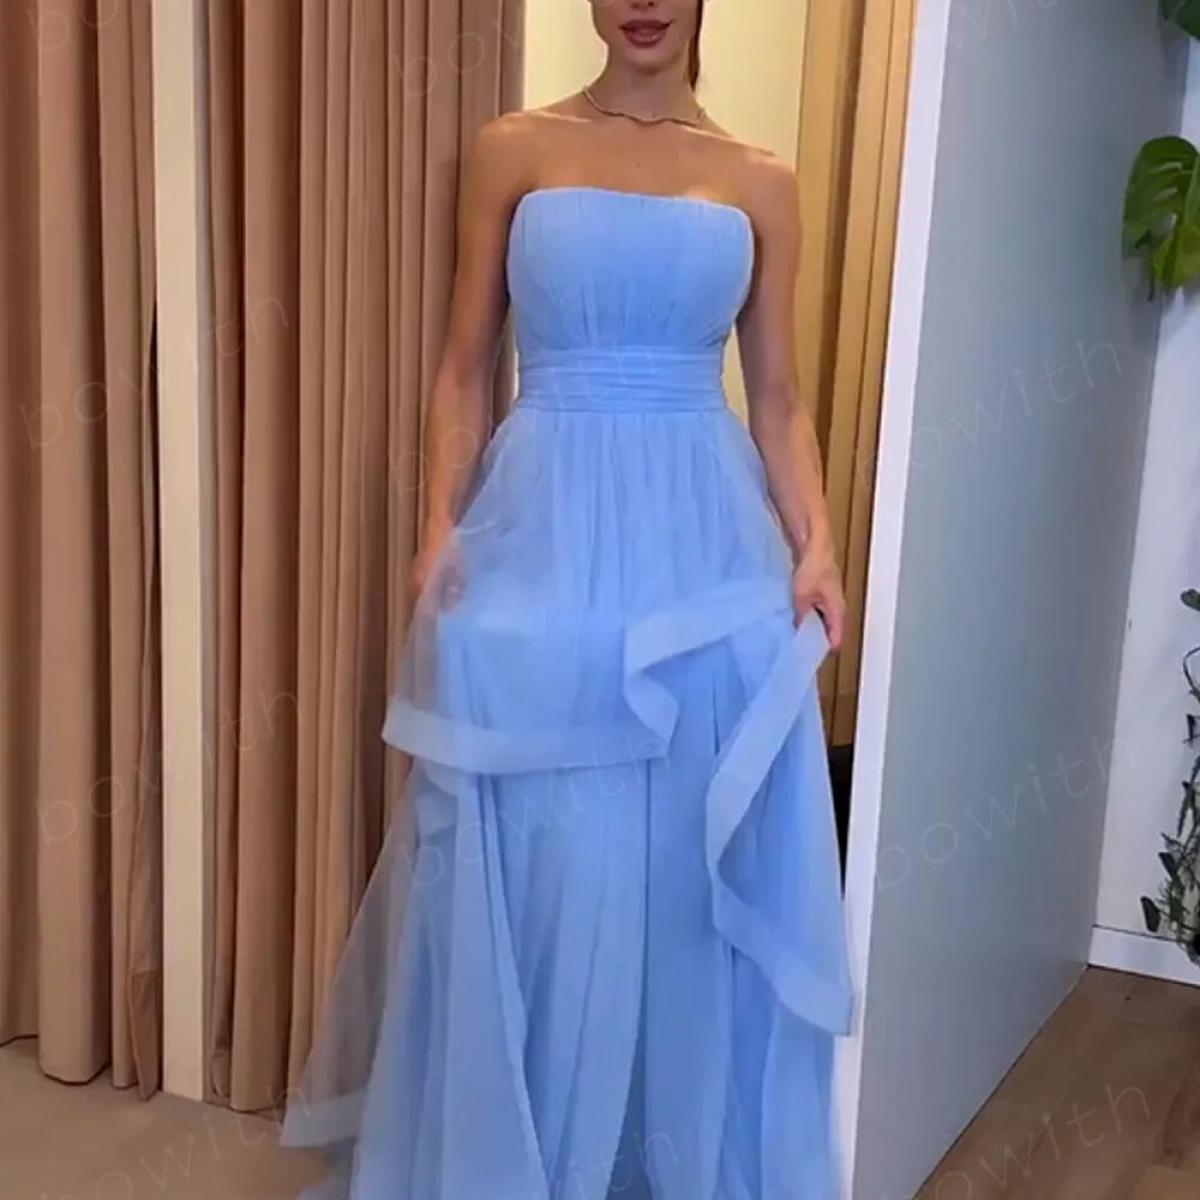 Bowith Tulle Evening Dresses For Women Strapless Maxi Party Dresses With Belt Formal Evening Gown With Tiered Layers Rob